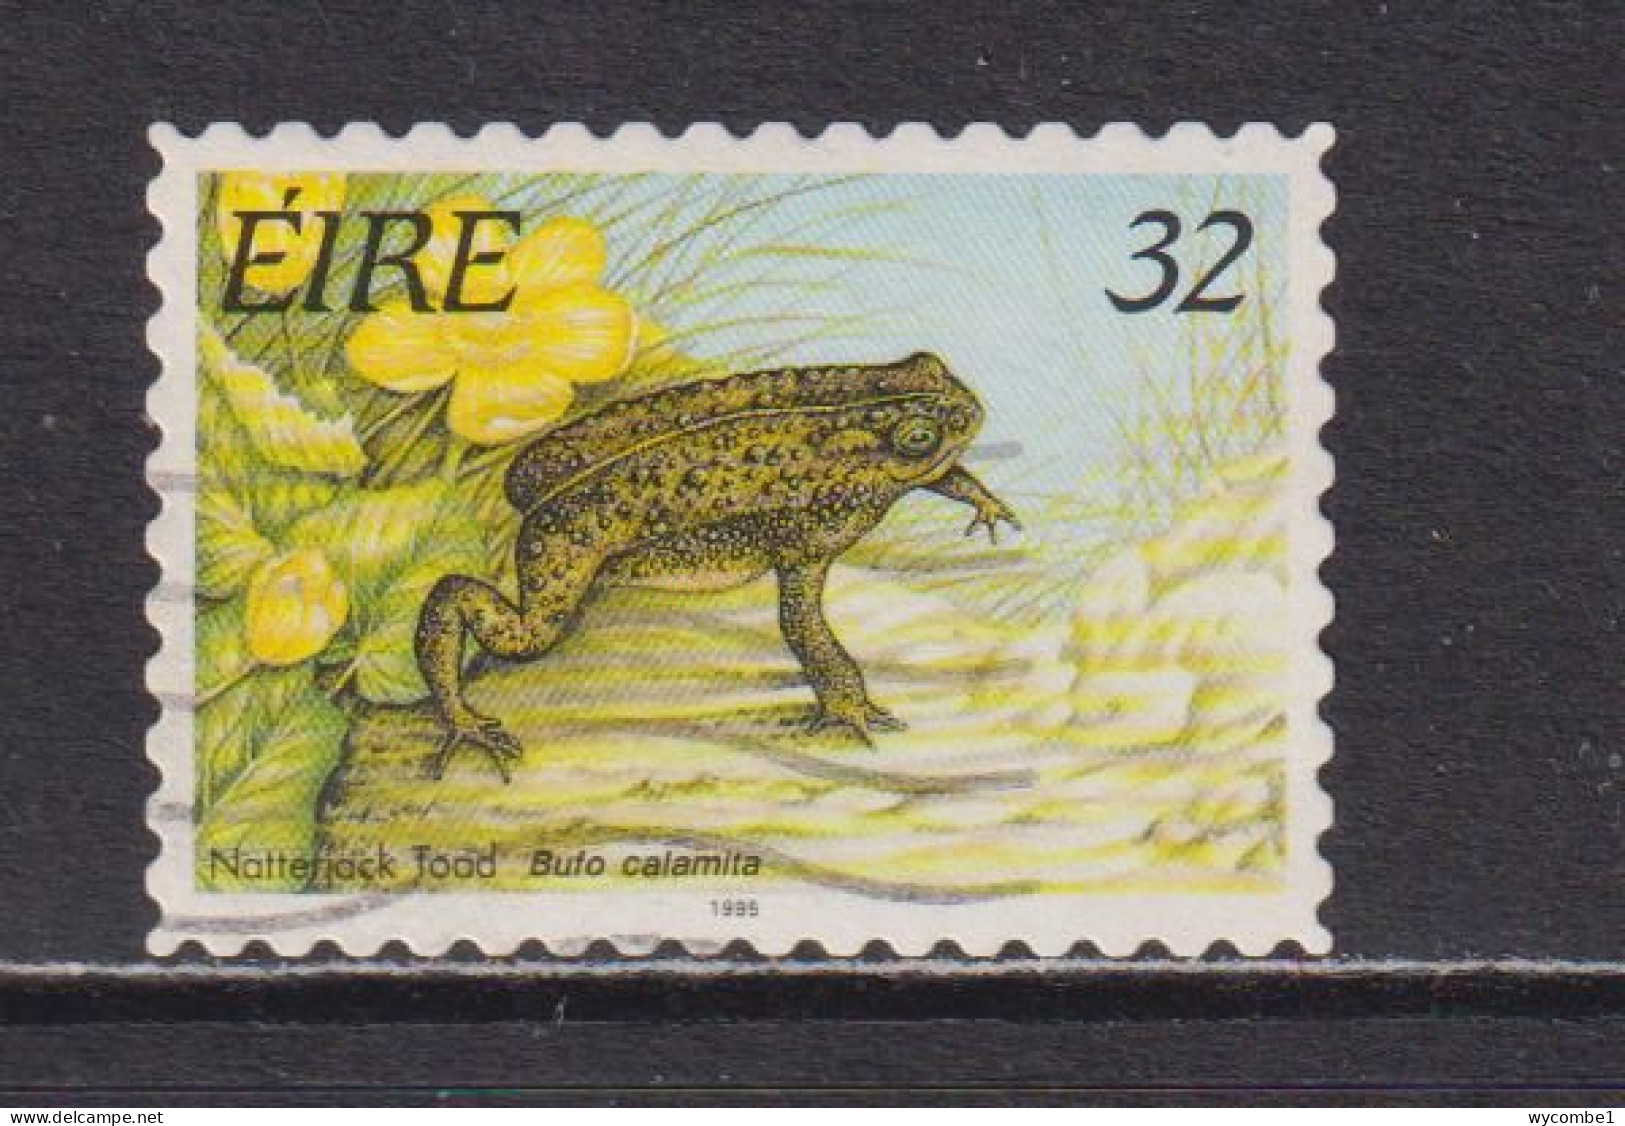 IRELAND - 1995  Reptiles And Amphibians  32p Used As Scan - Usados